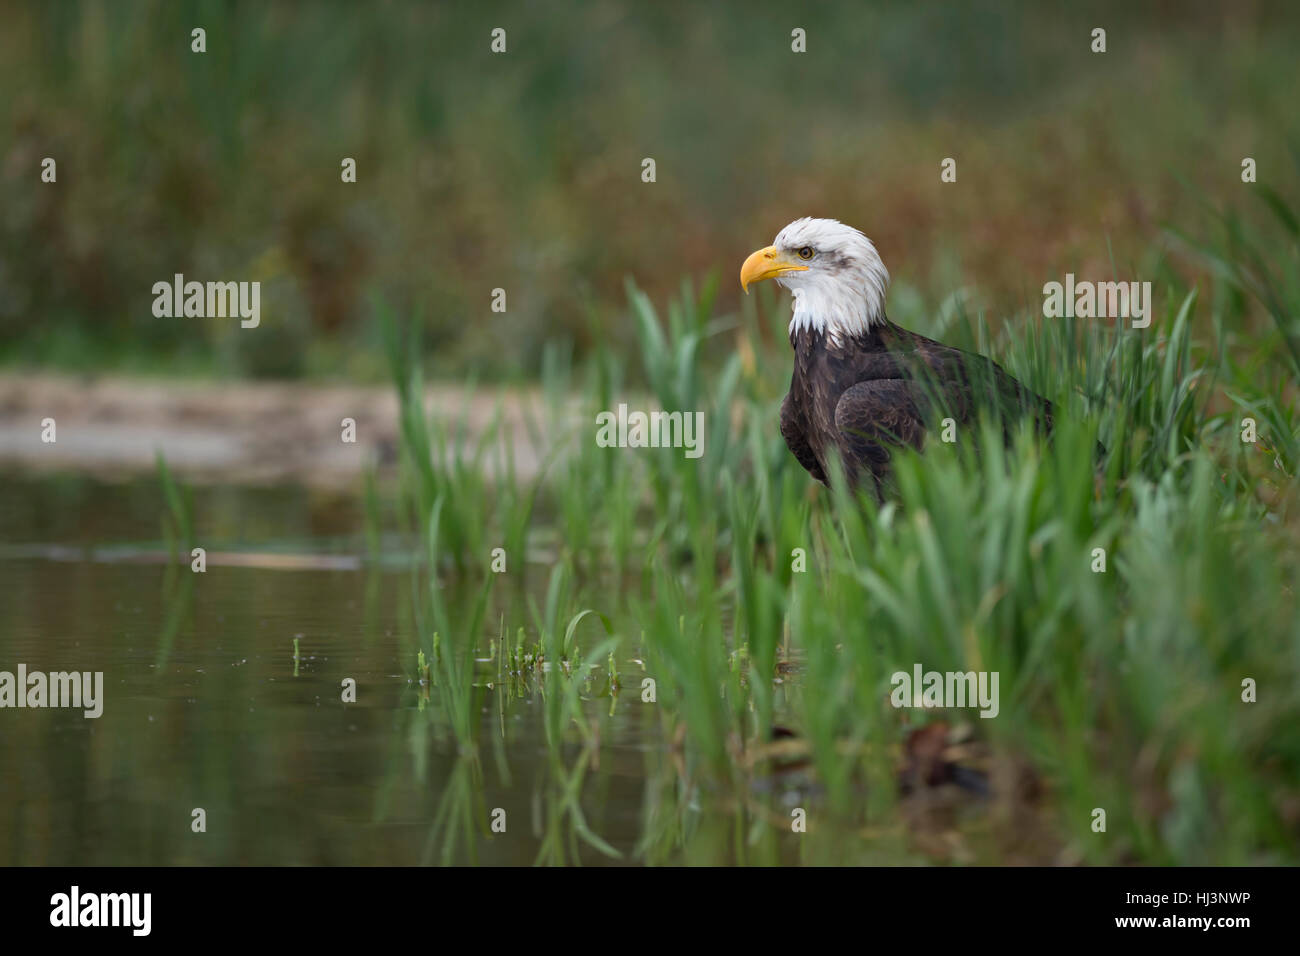 Bald Eagle ( Haliaeetus leucocephalus ), adult, sitting on the ground, hiding in reed grass at the bank of a lake, hunting. Stock Photo